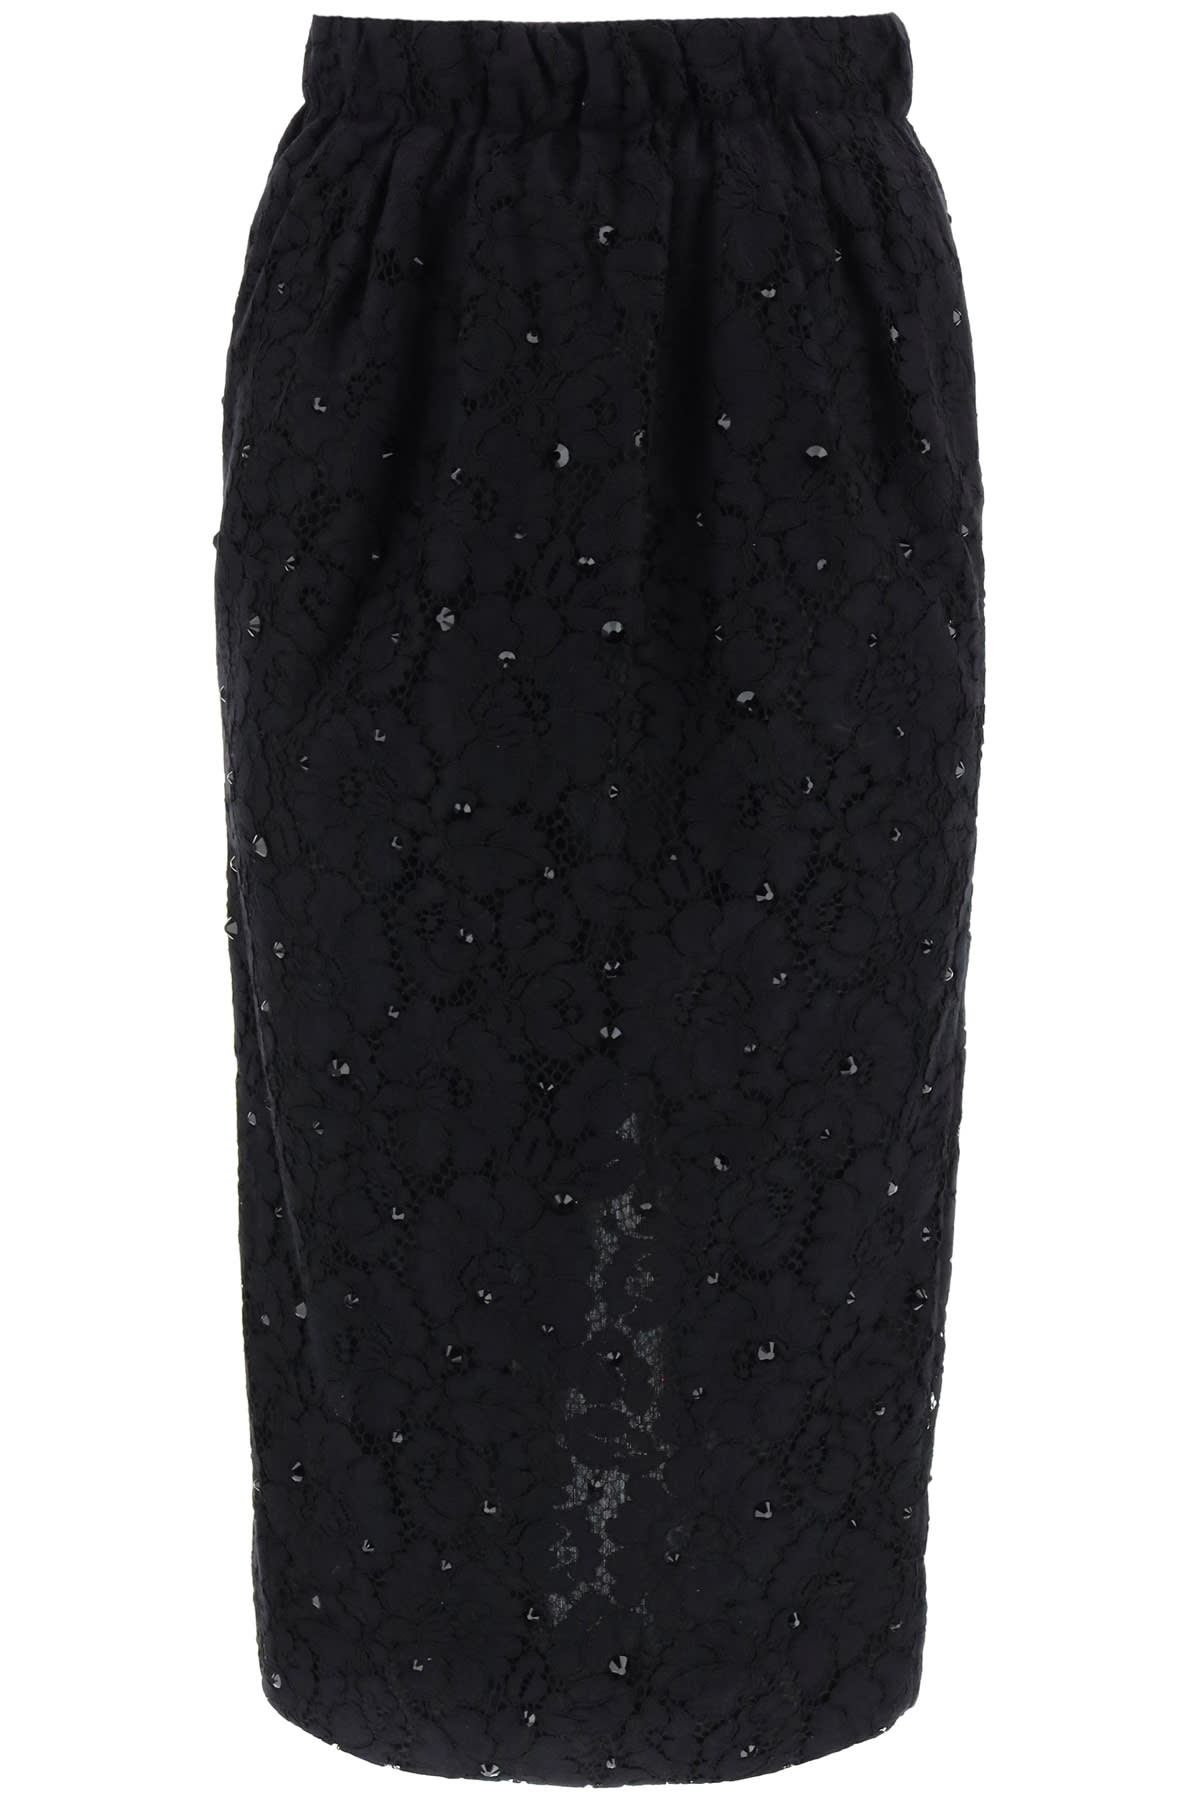 N.21 Lace Pencil Skirt.